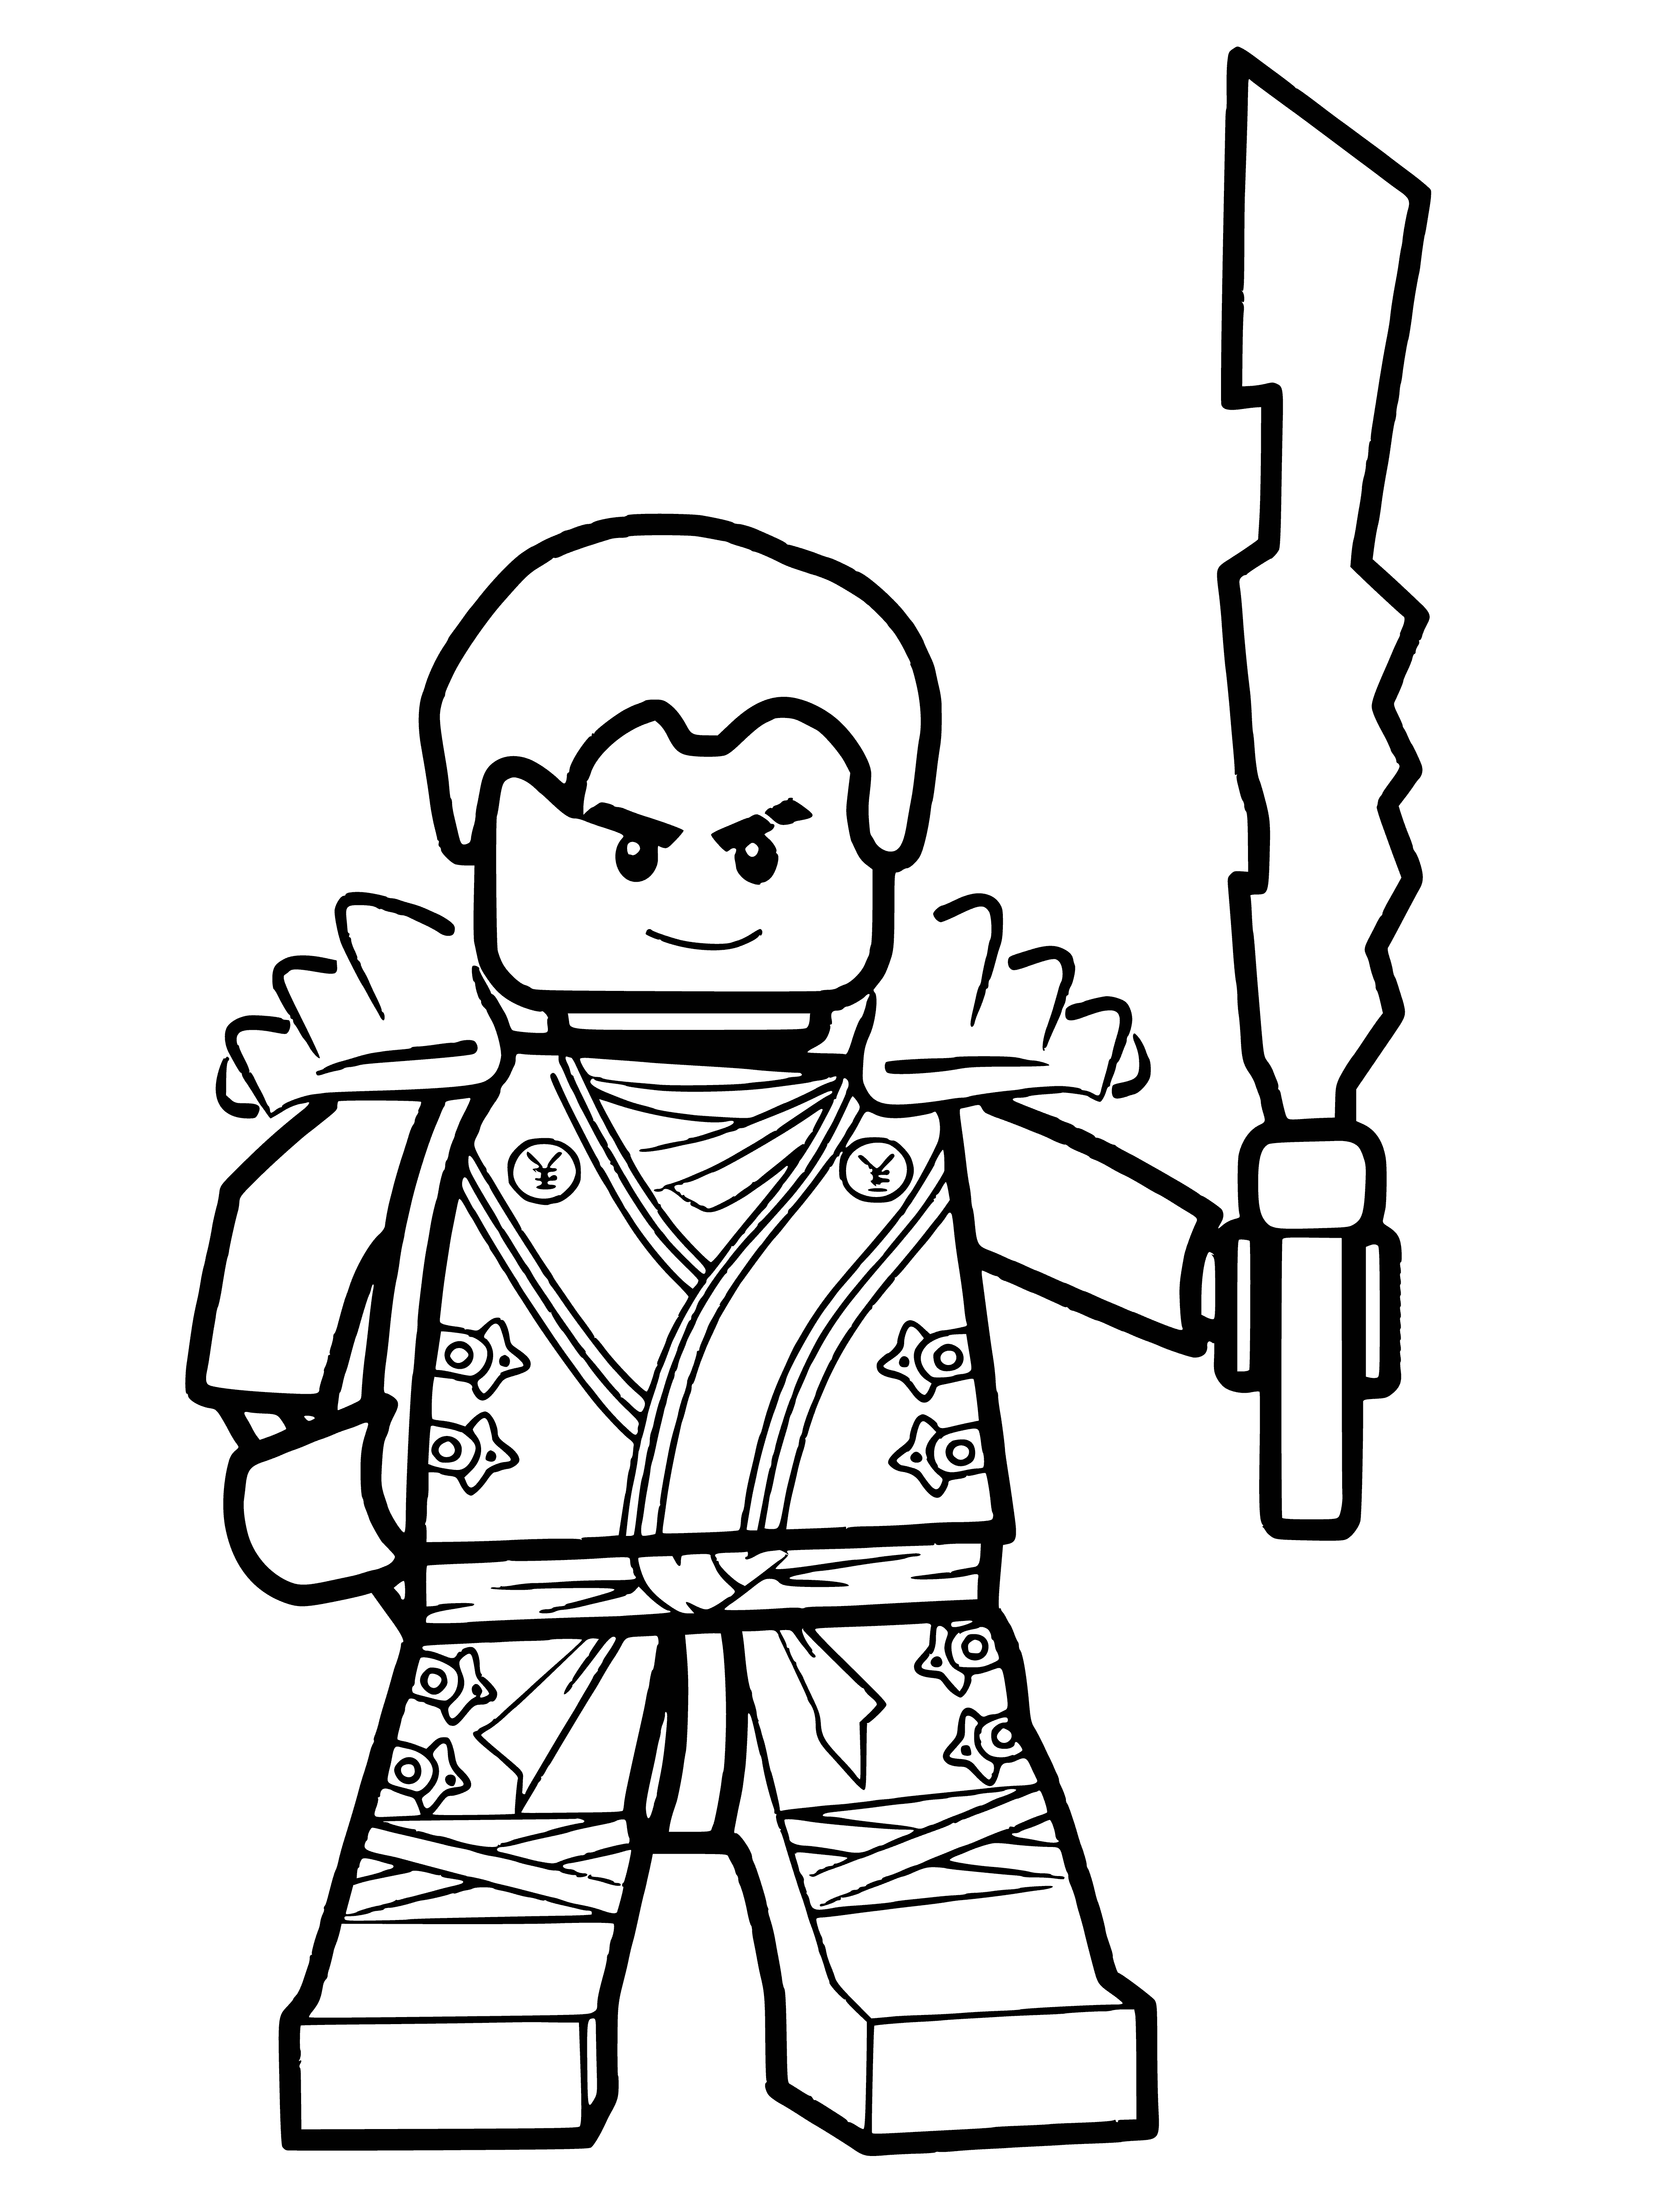 coloring page: Ninja LEGO figure in all black with red scarf and katana sword, silver belt and chain, red backpack. Ready to battle! #NinjaLife